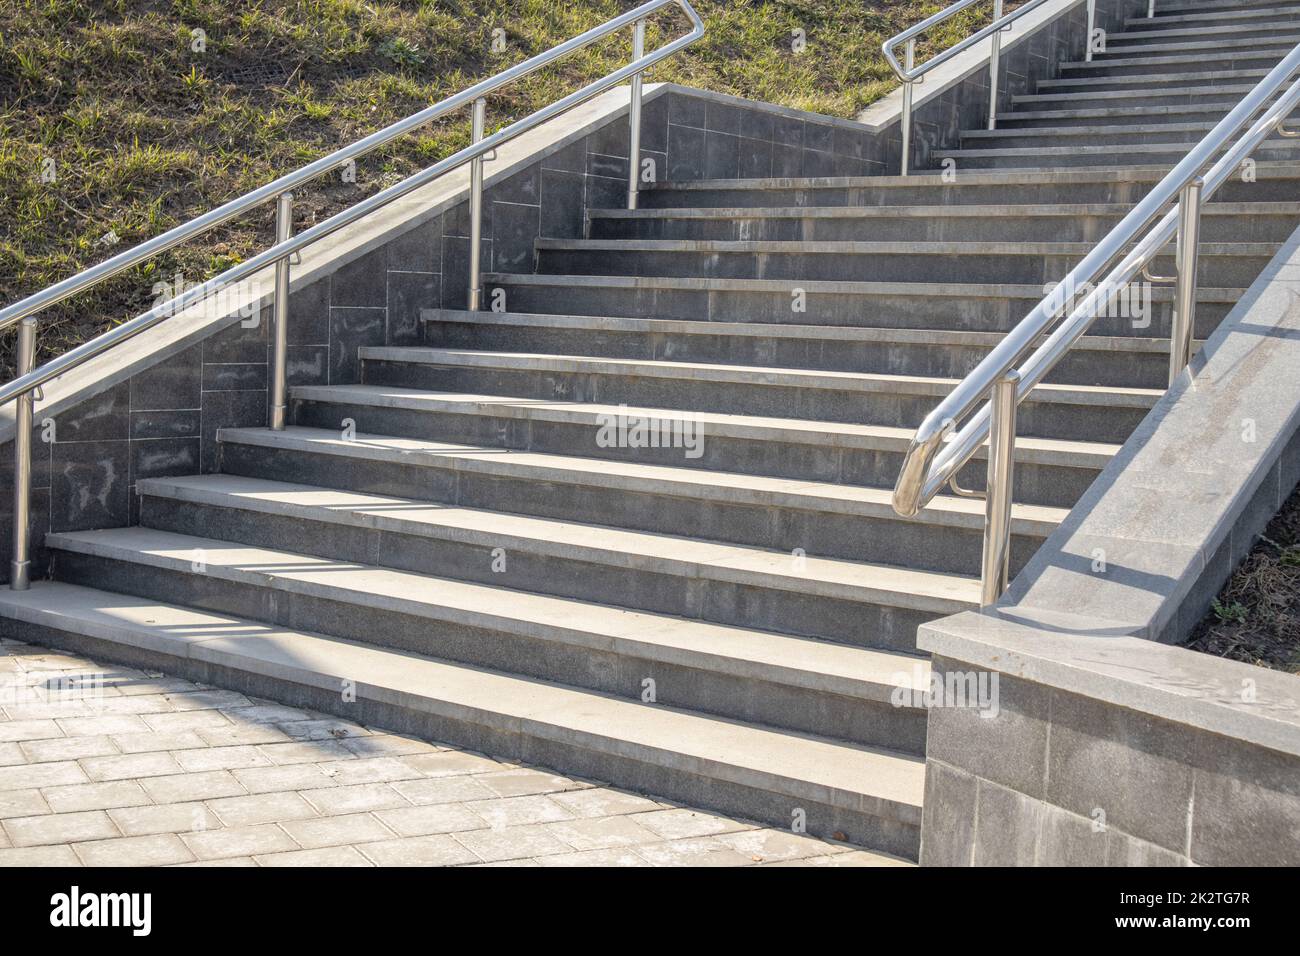 Outdoor concrete steps on a modern city staircase with metal railings on a sunny day, outdoors, bottom view Stock Photo